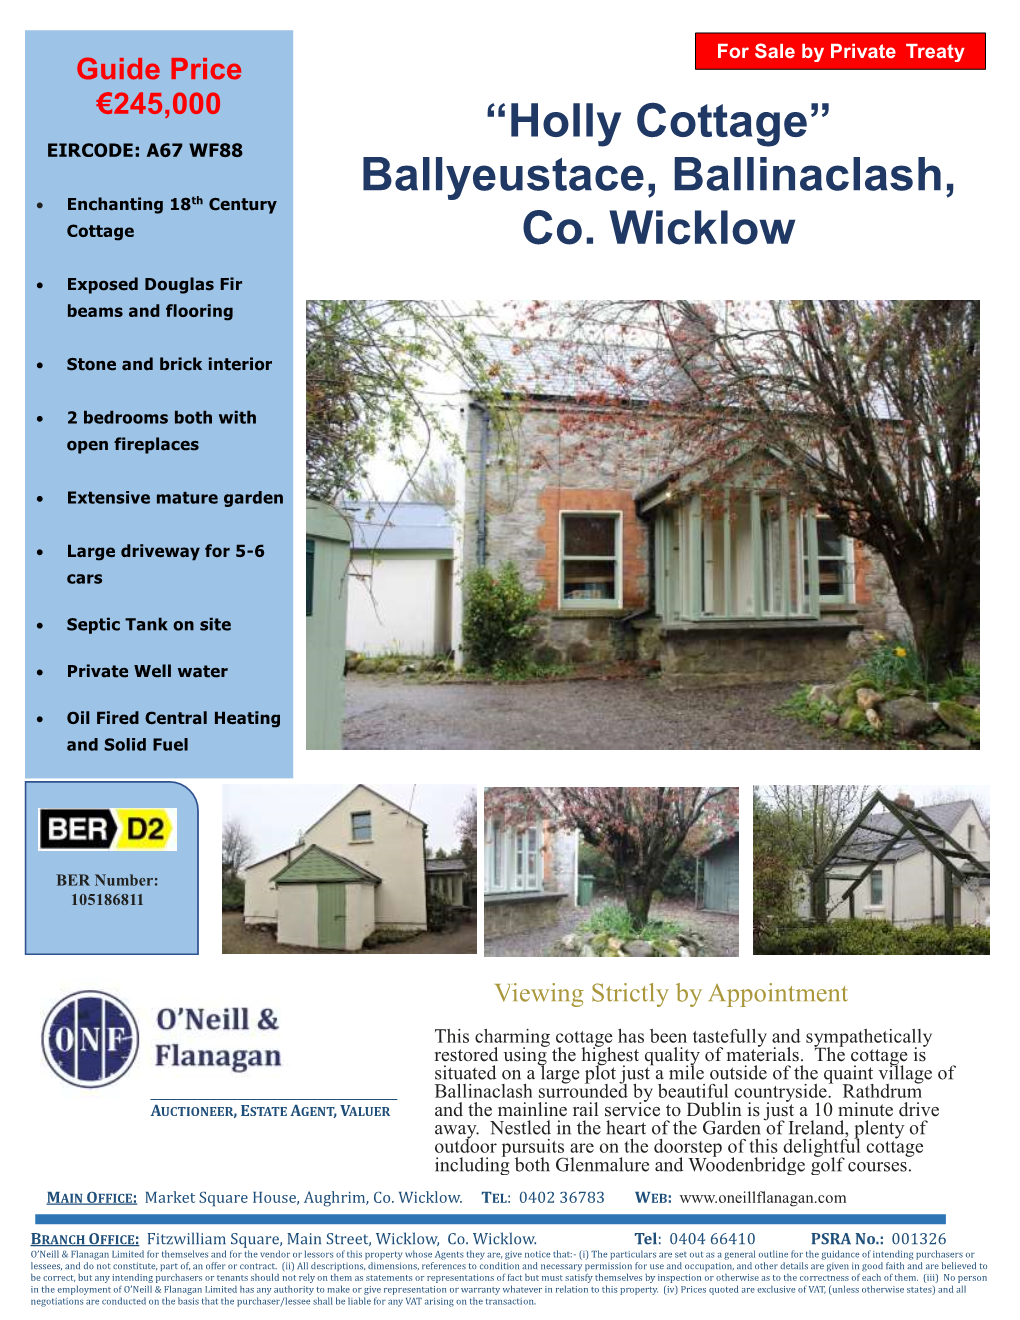 “Holly Cottage” Ballyeustace, Ballinaclash, Co. Wicklow